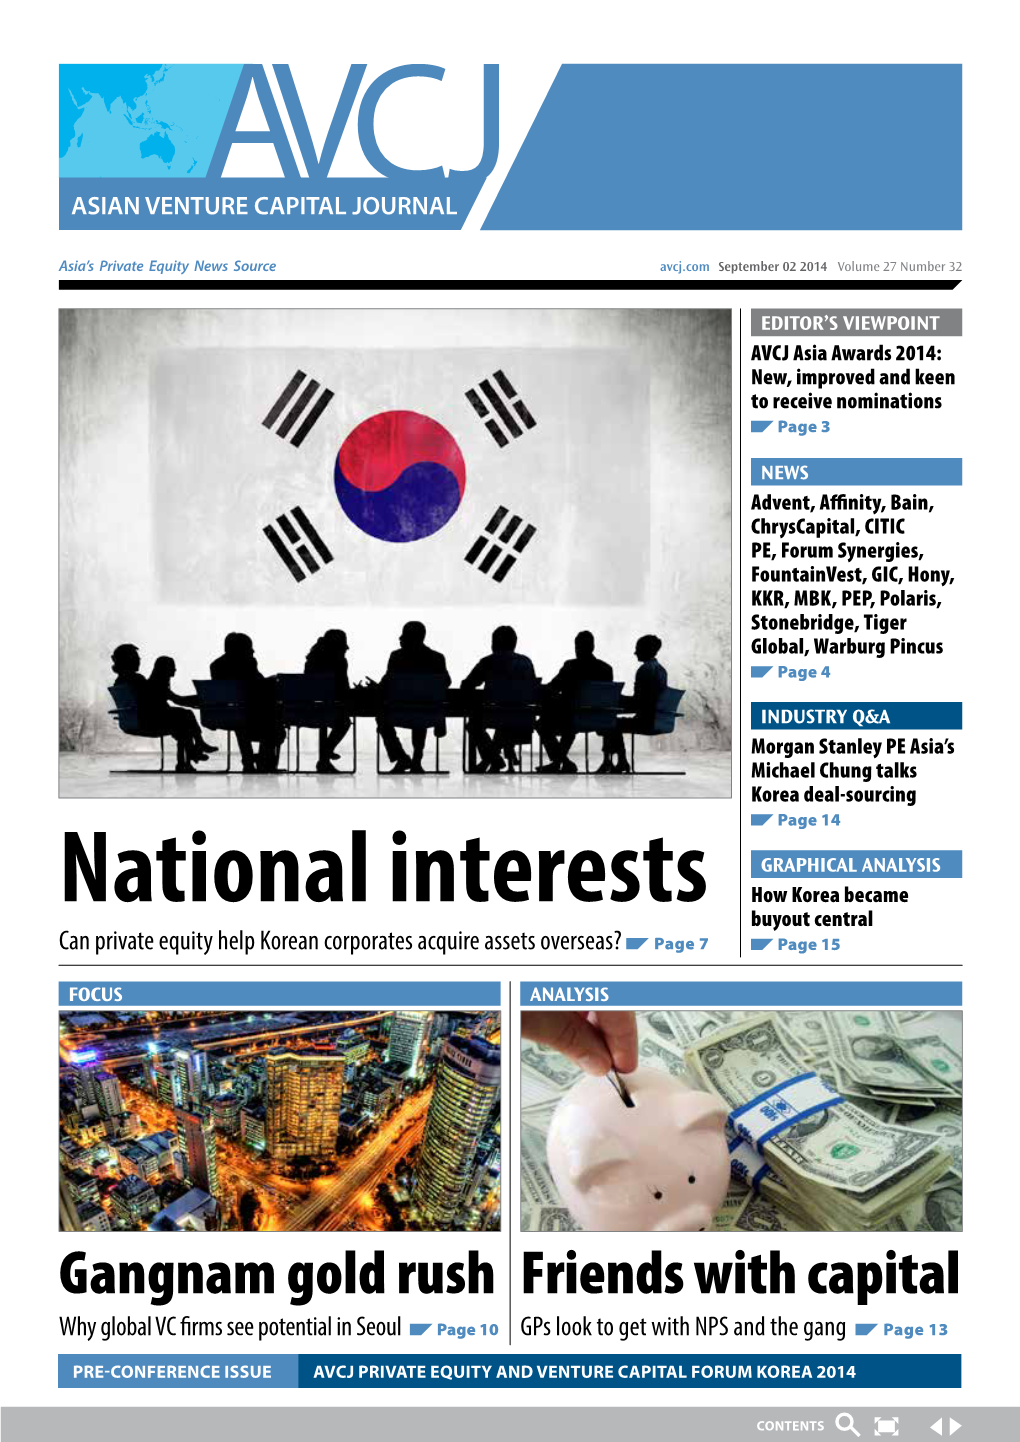 National Interests How Korea Became Buyout Central Can Private Equity Help Korean Corporates Acquire Assets Overseas? Page 7 Page 15